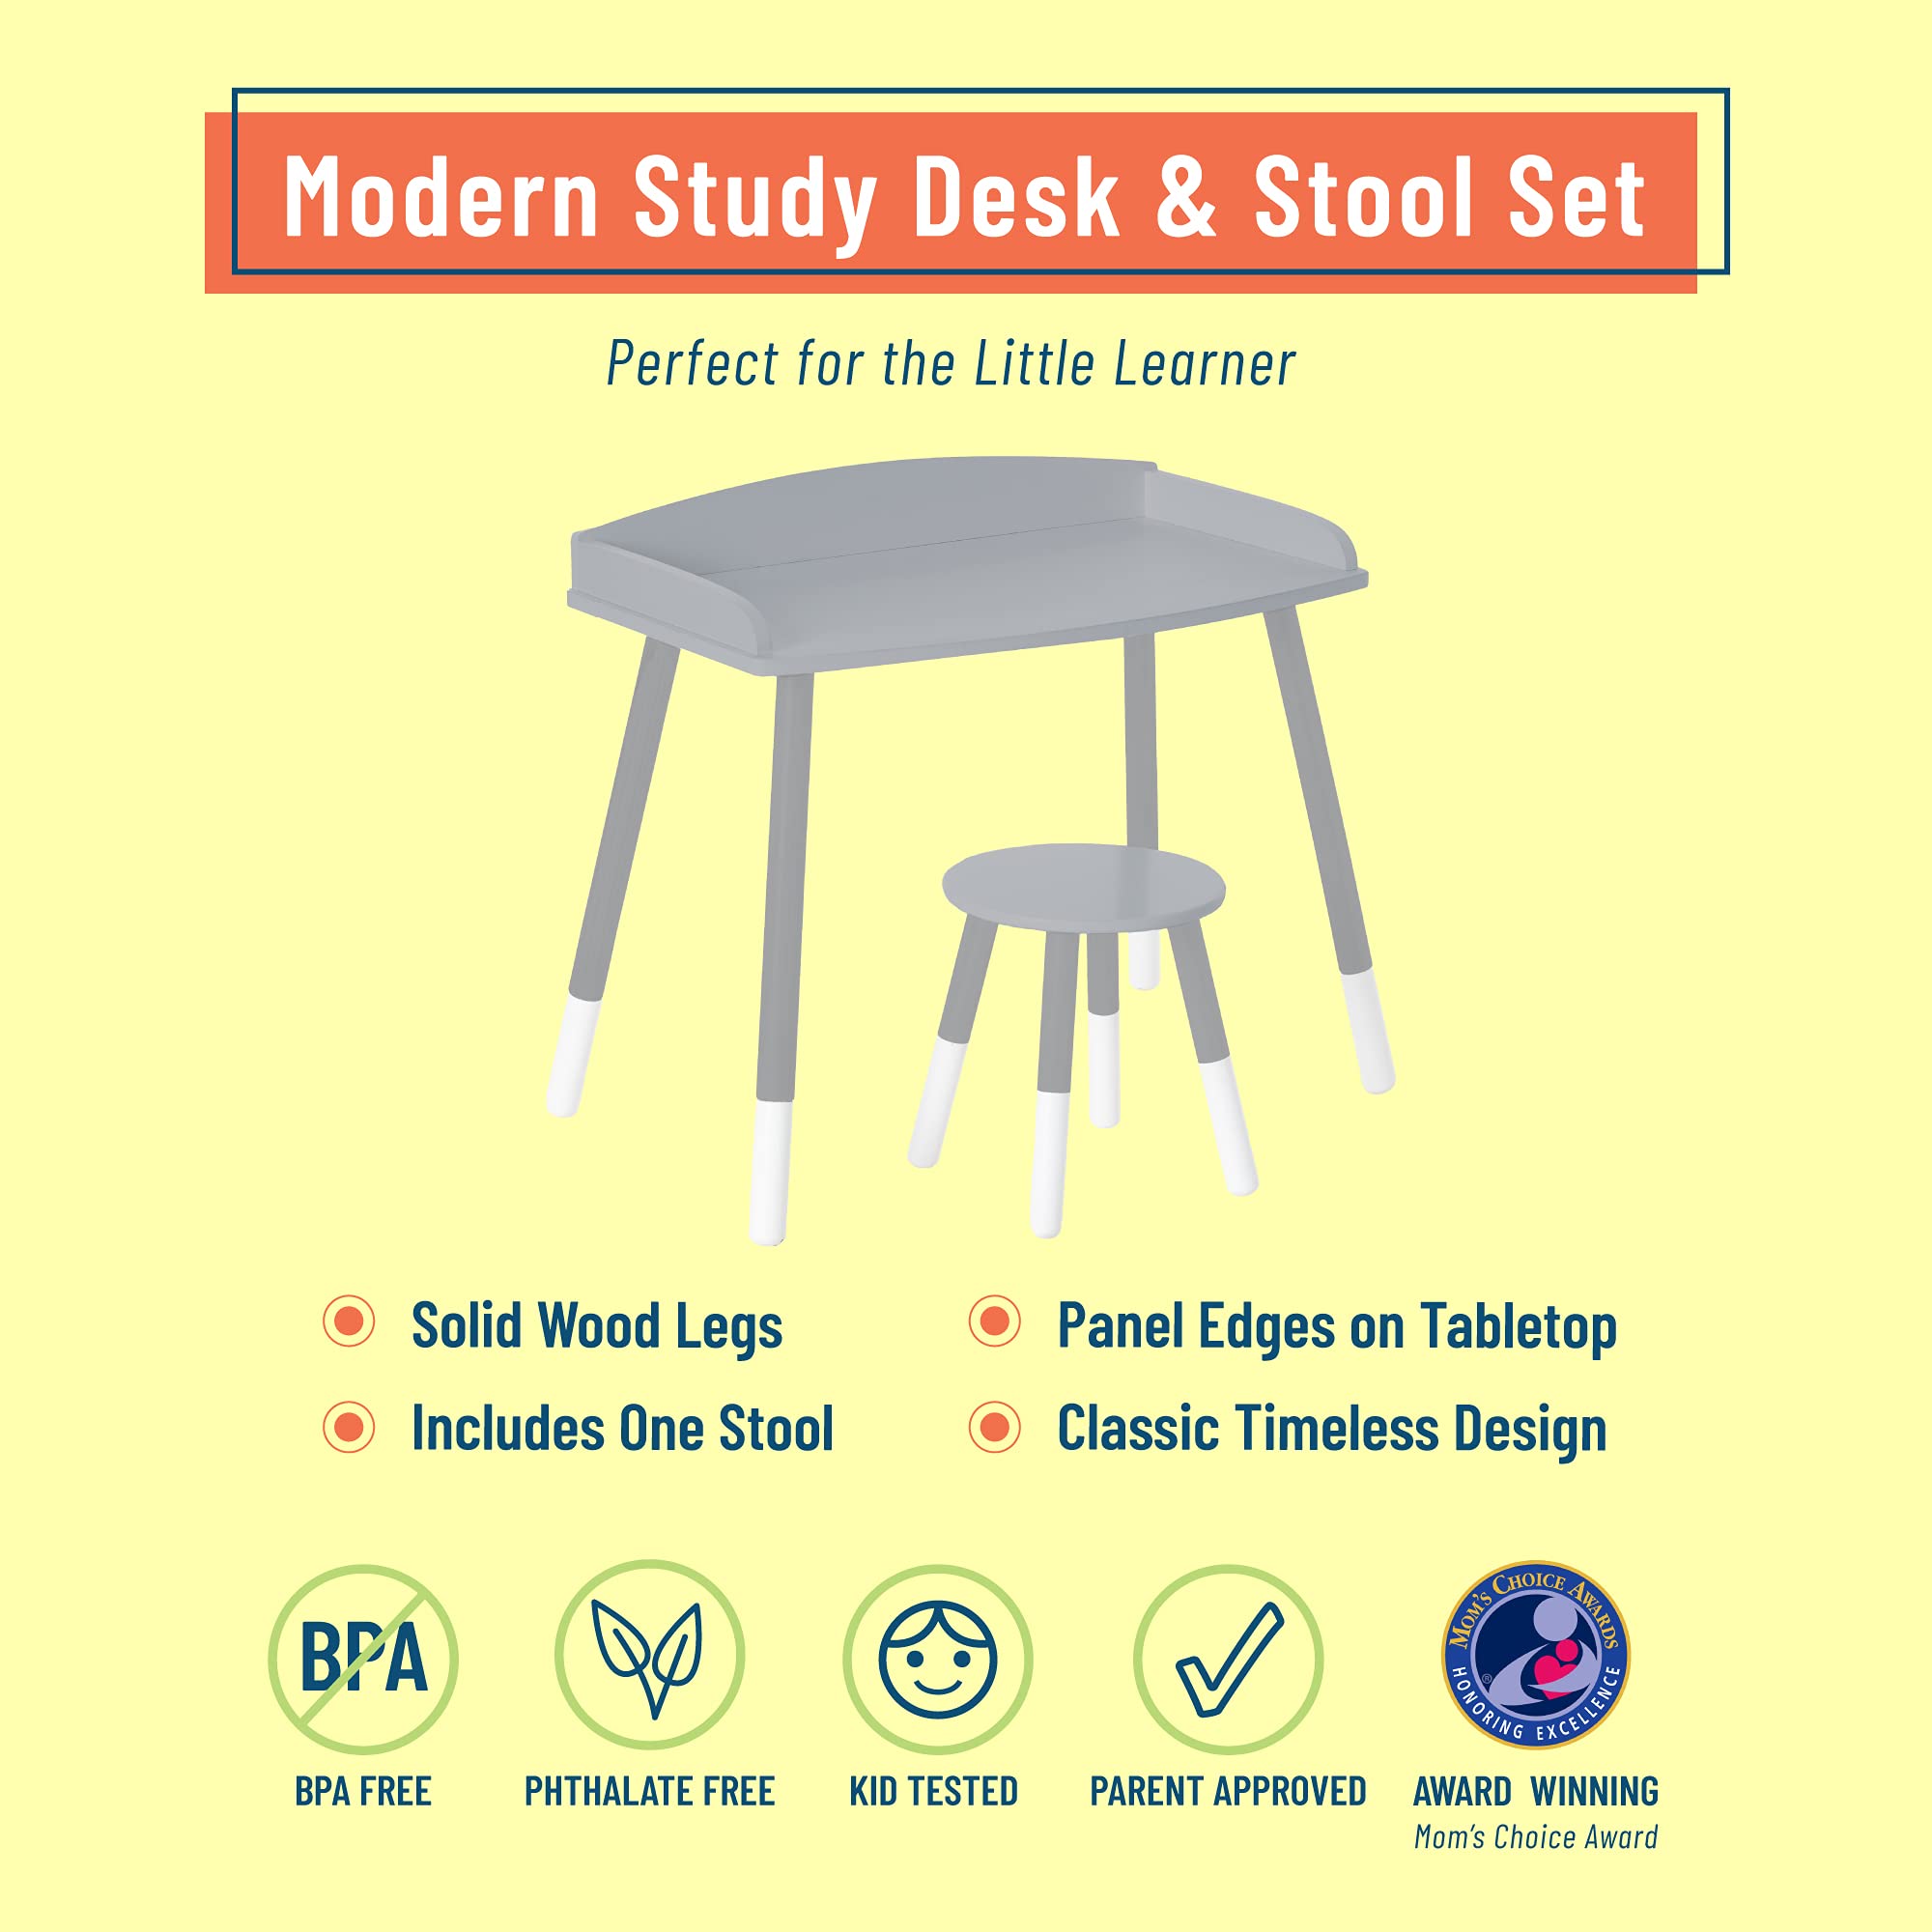 Wildkin Kids Modern Study Desk and Stool Set for Boys and Girls, Includes One Matching Stool, Classic Timeless Design Features Panel Edges on Tabletop and Solid Wood Legs (Gray w/White)